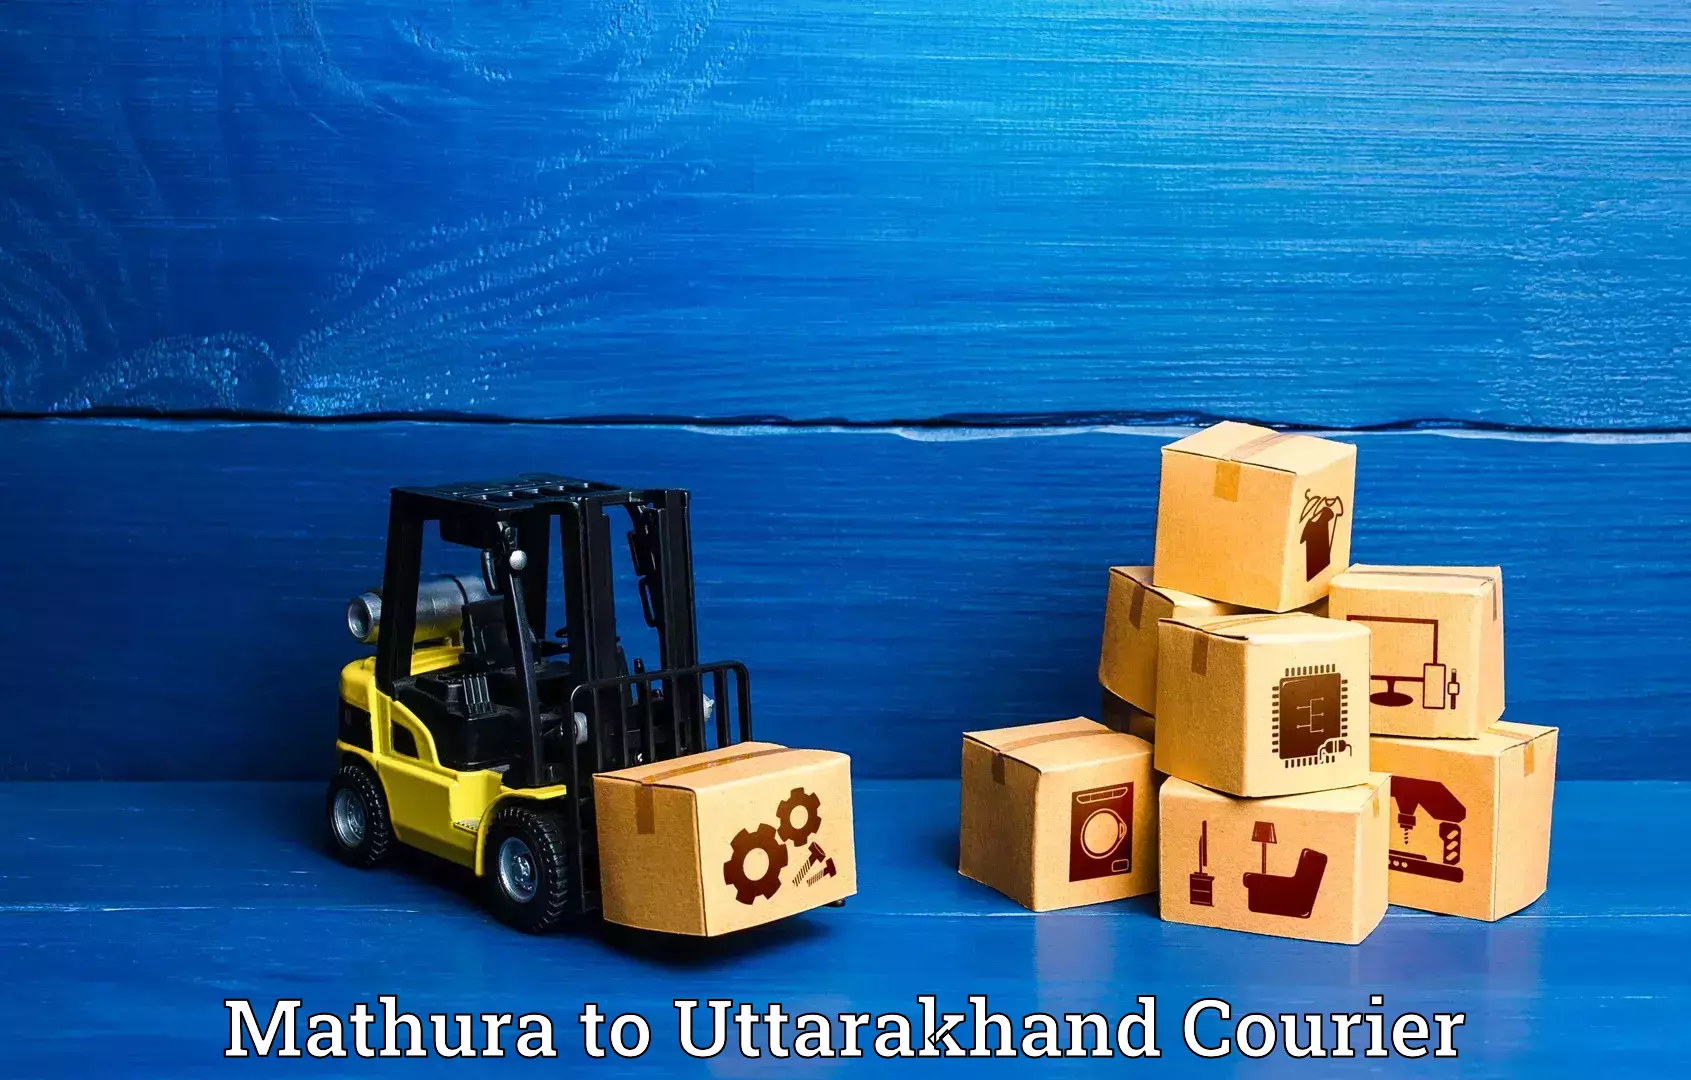 Luggage shipment specialists Mathura to IIT Roorkee